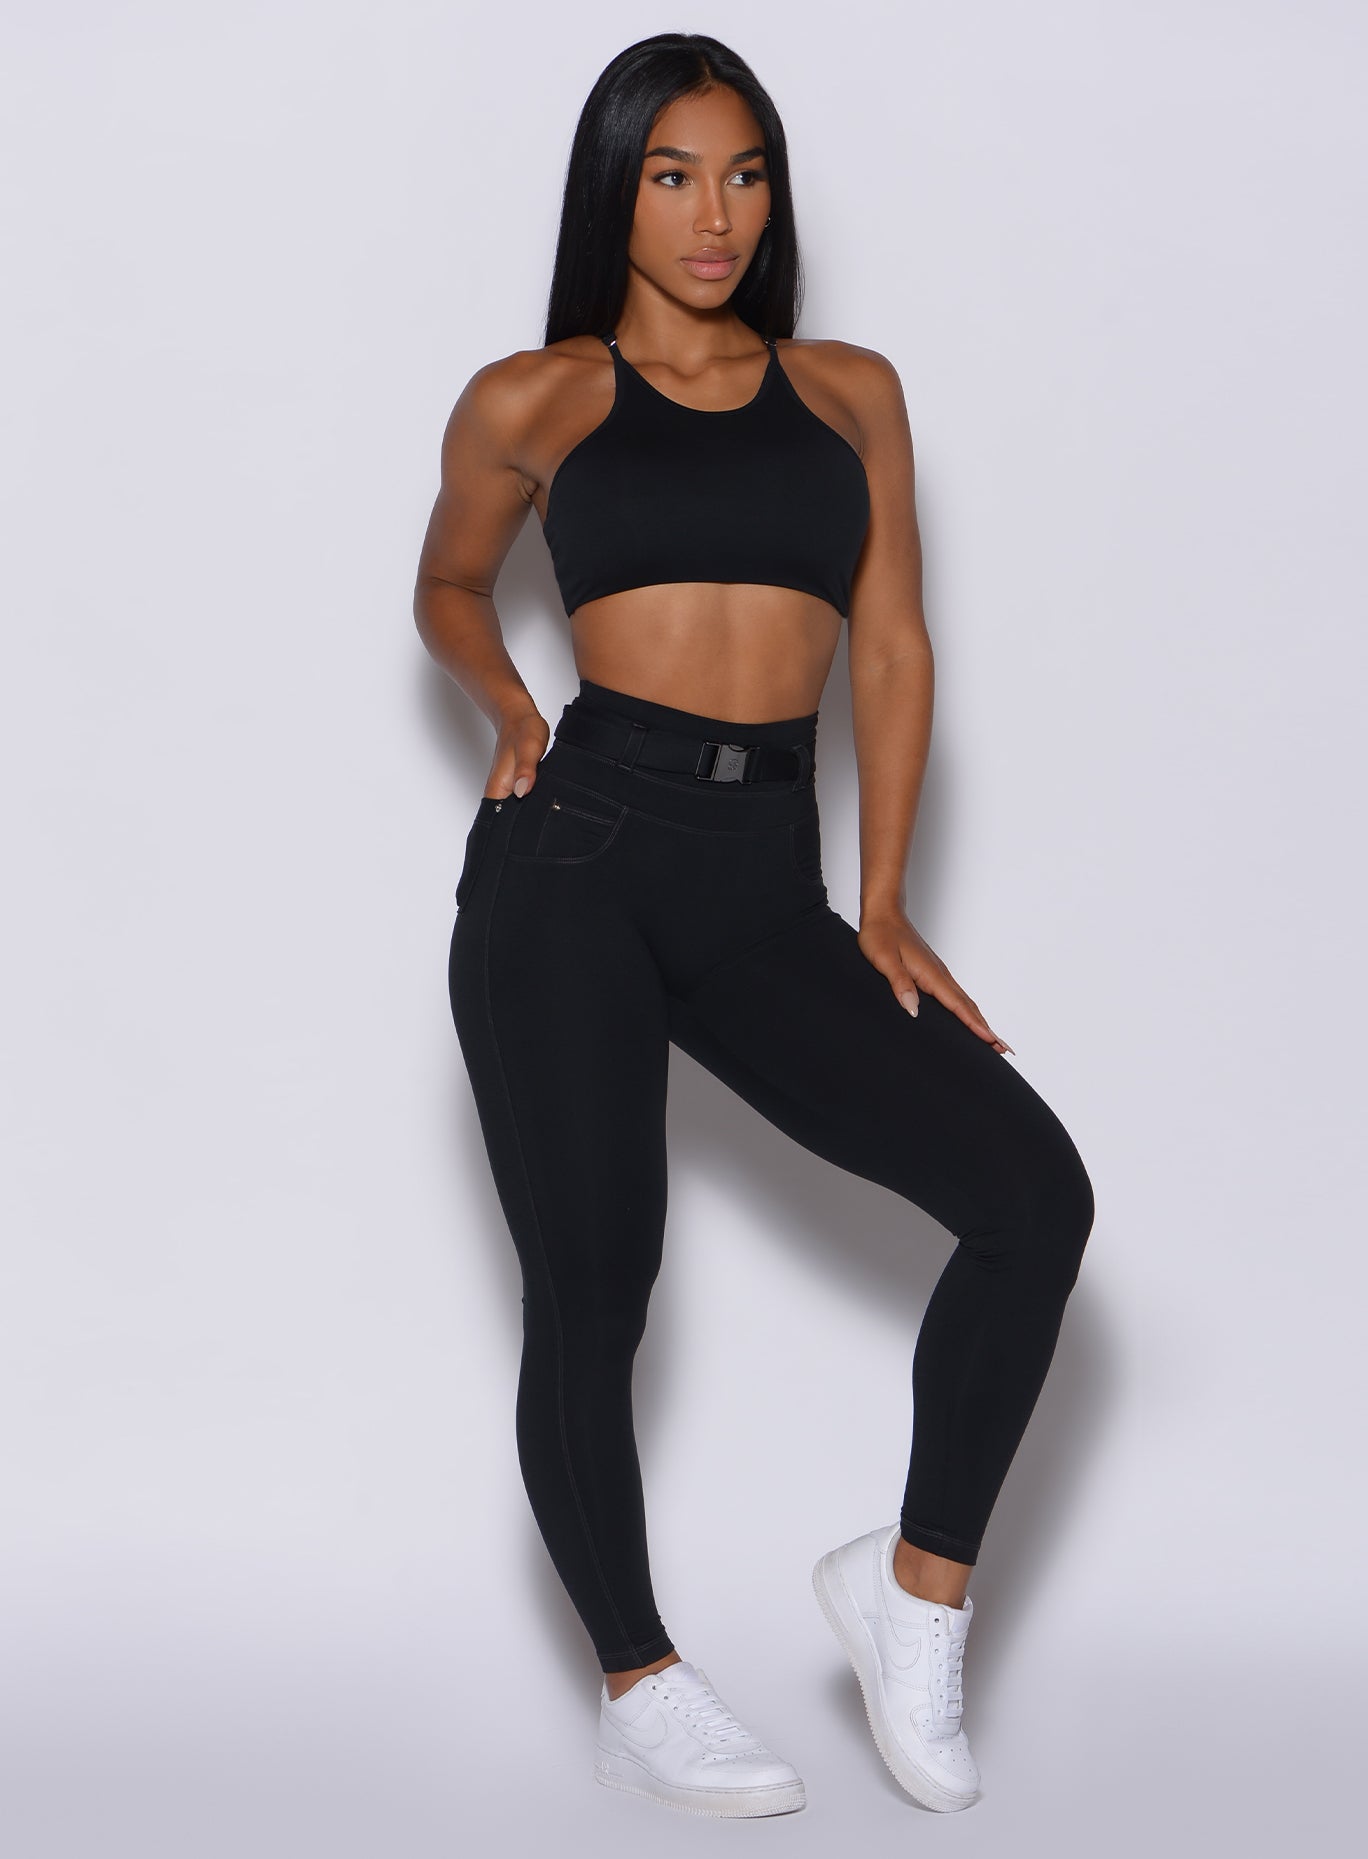 front profile view of a model wearing our black peach bottoms leggings along with the matching sports bra 